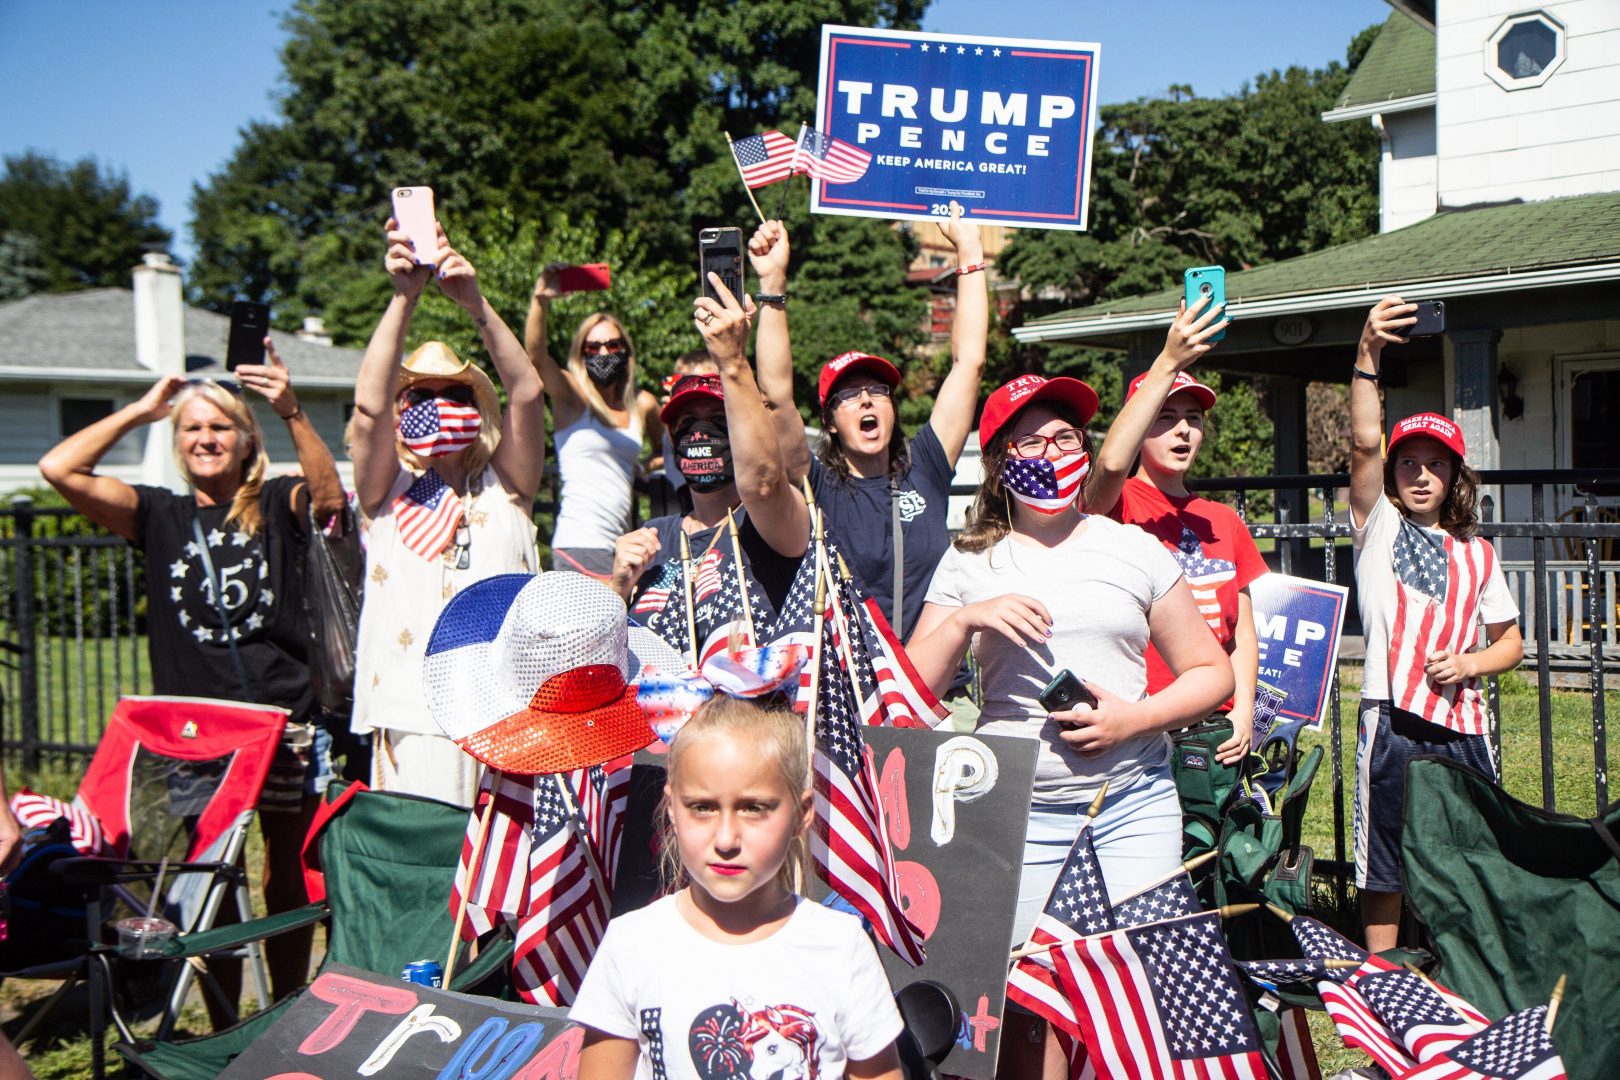 Trump fans excitedly greeted his motorcade as he campaigned in Old Forge, Pa., Thursday.